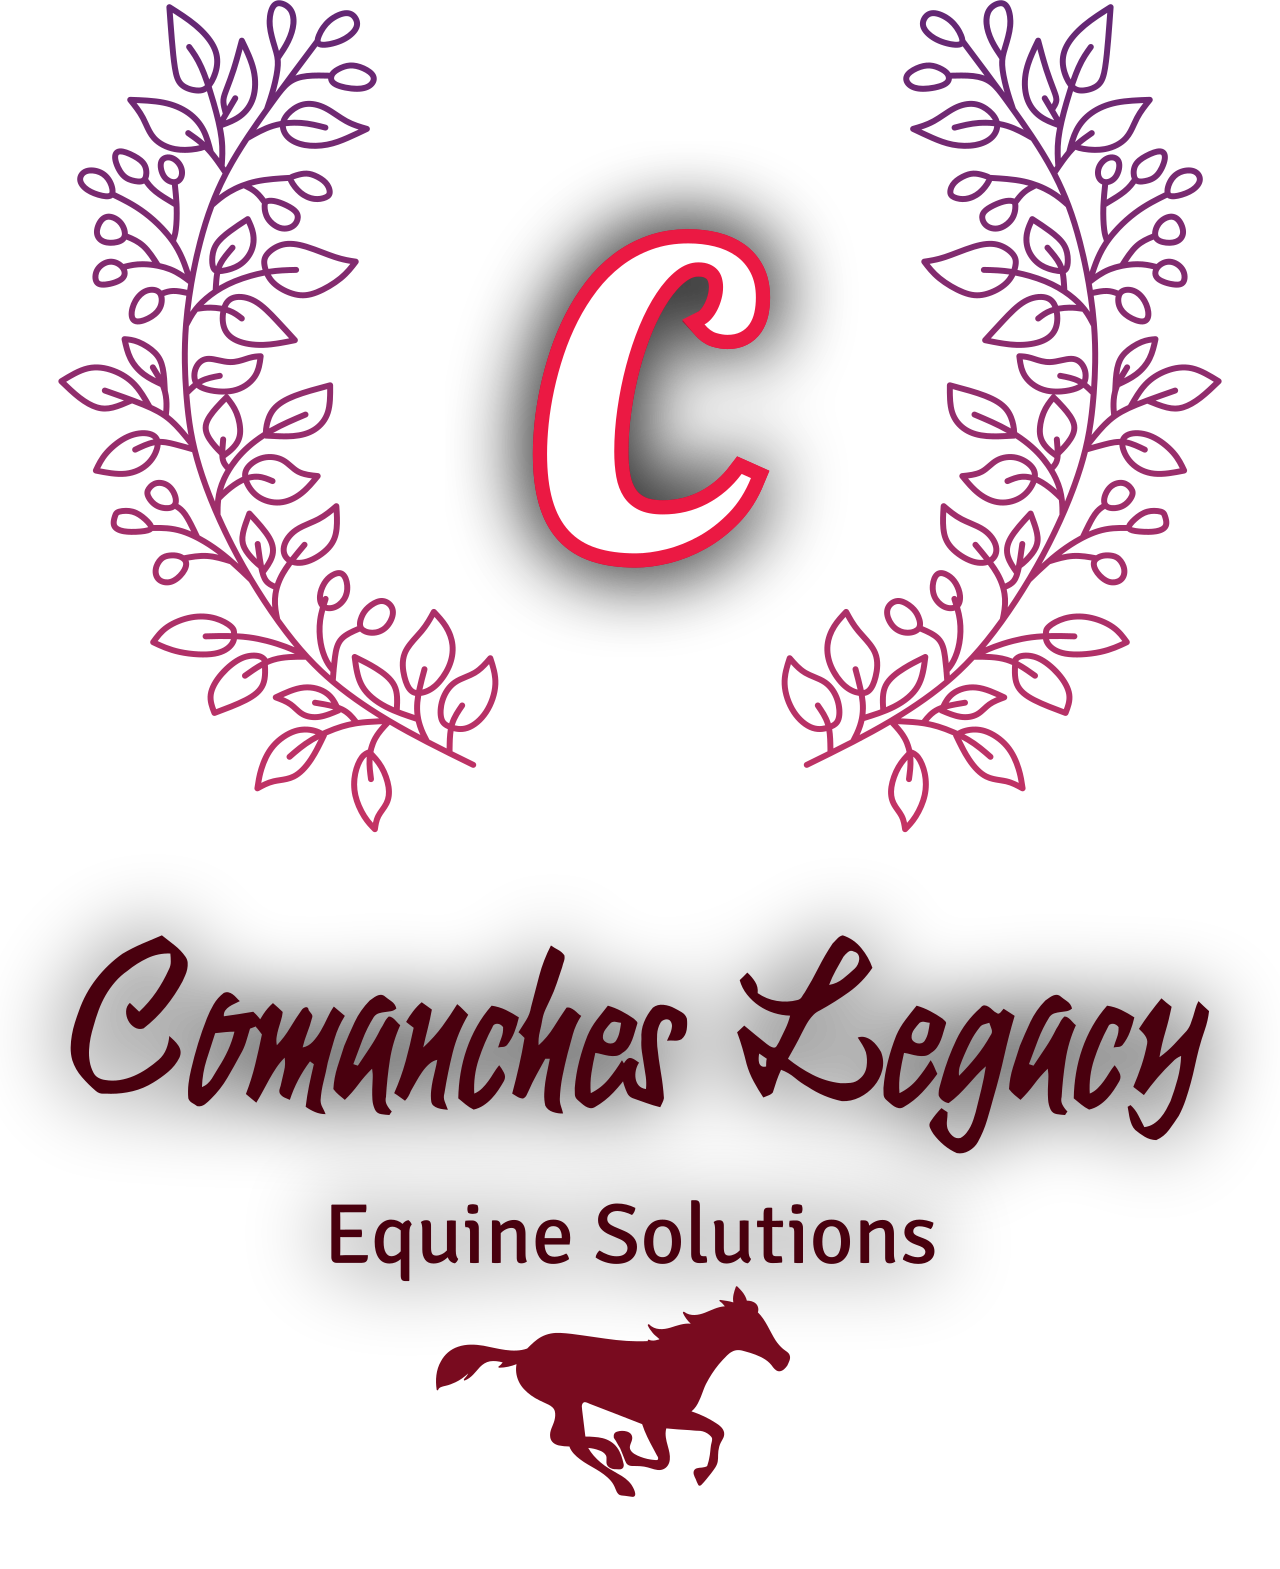 Comanches Legacy's web page